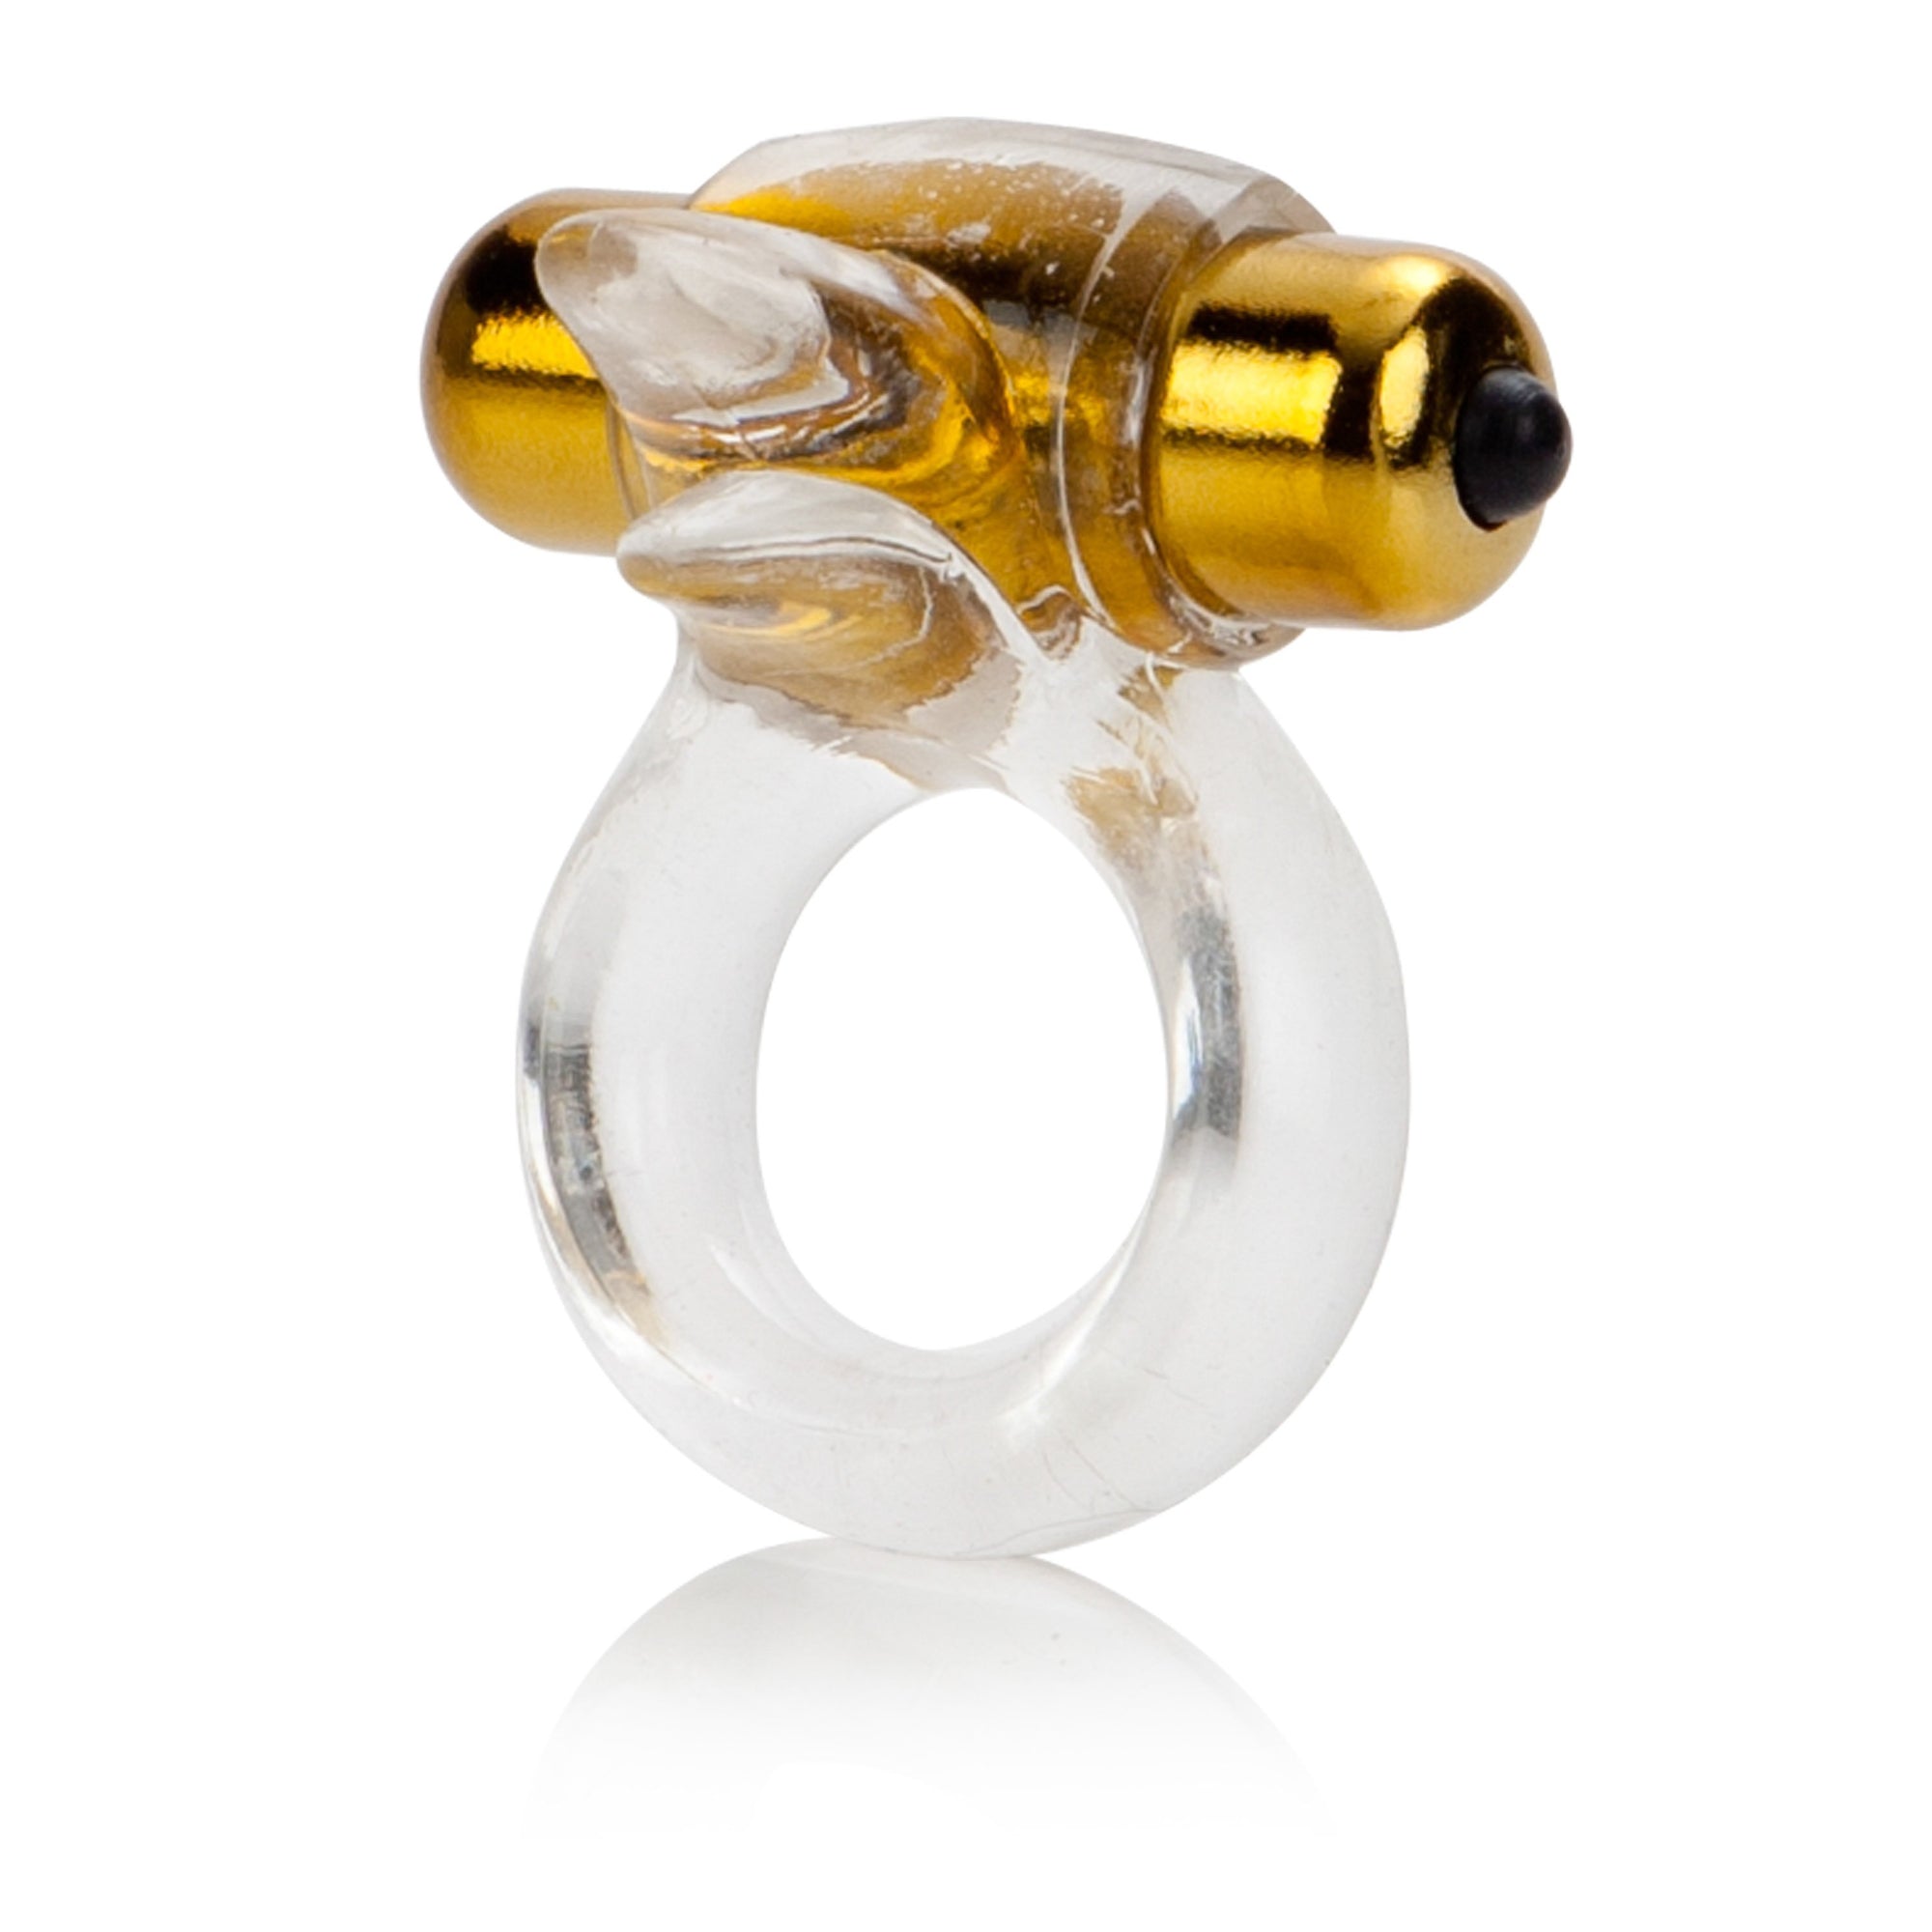 California Exotics - Pure Gold Double Trouble Enhancer Vibrating Cock Ring (Clear) Rubber Cock Ring (Vibration) Non Rechargeable Durio Asia